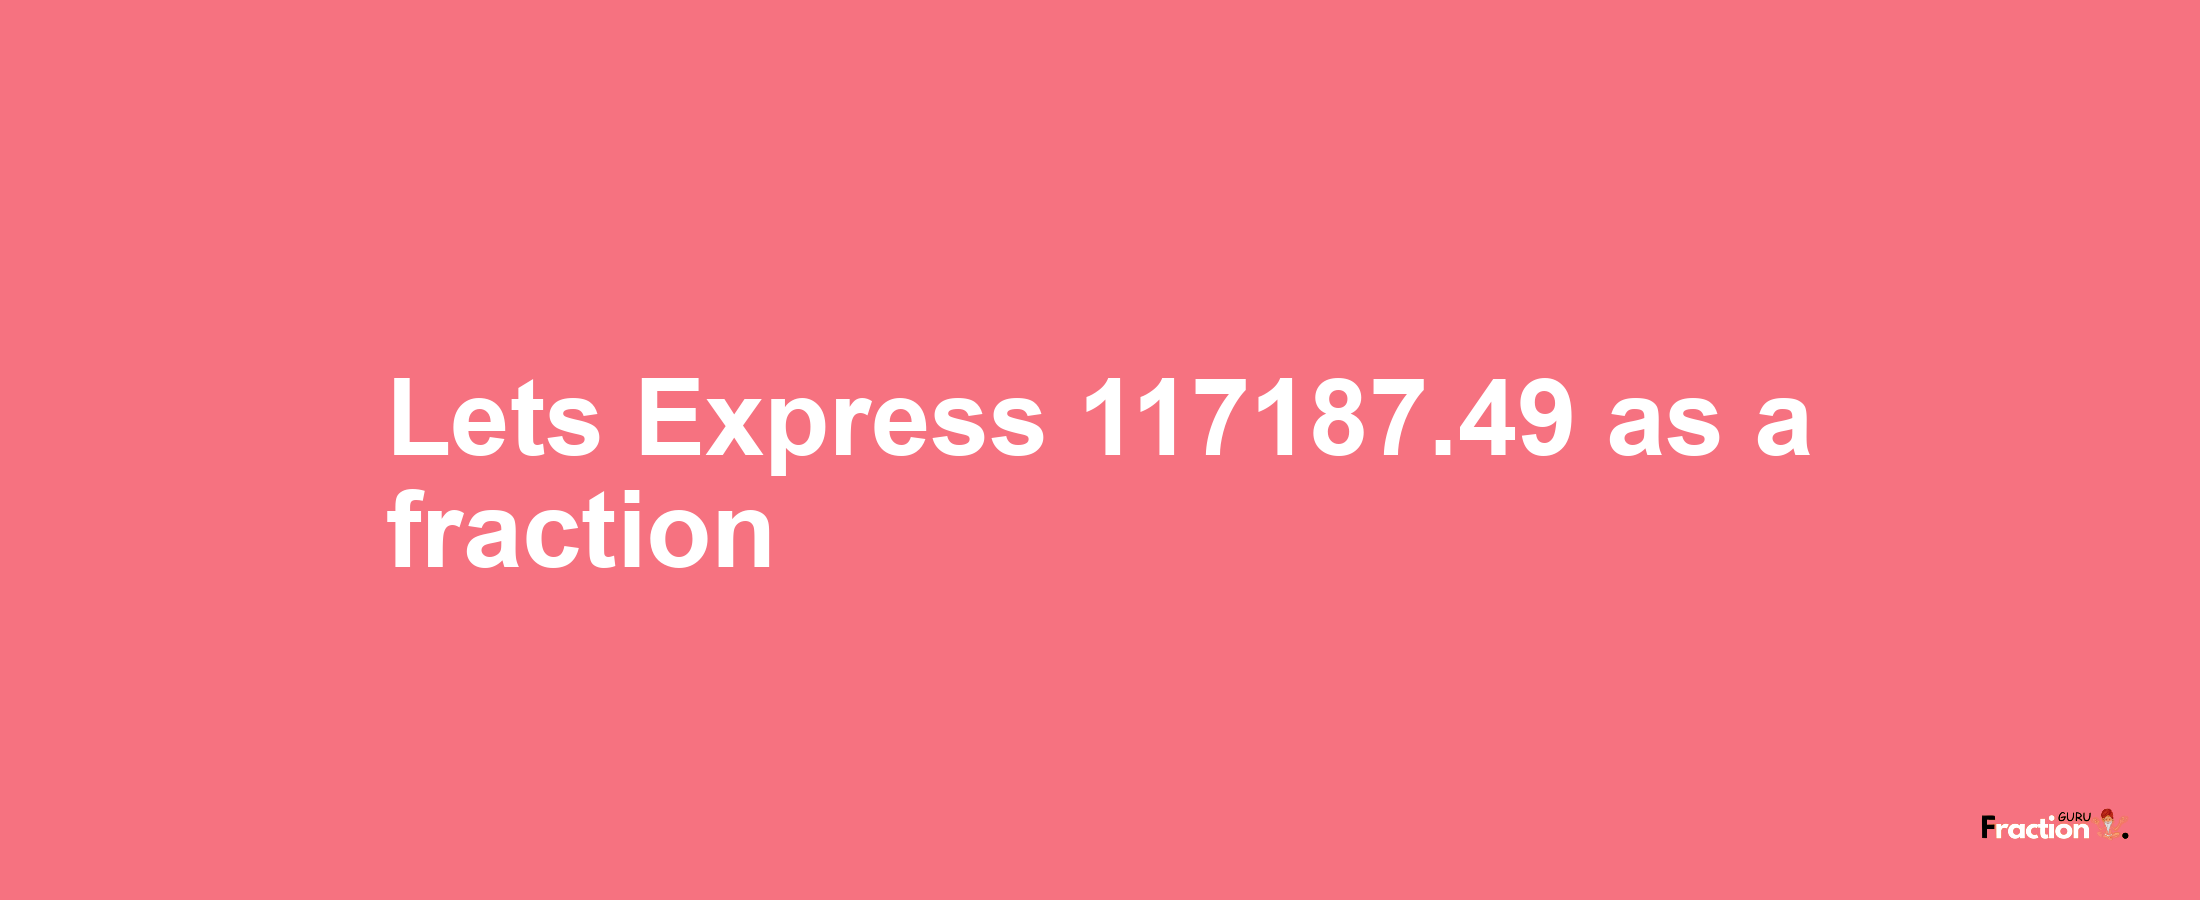 Lets Express 117187.49 as afraction